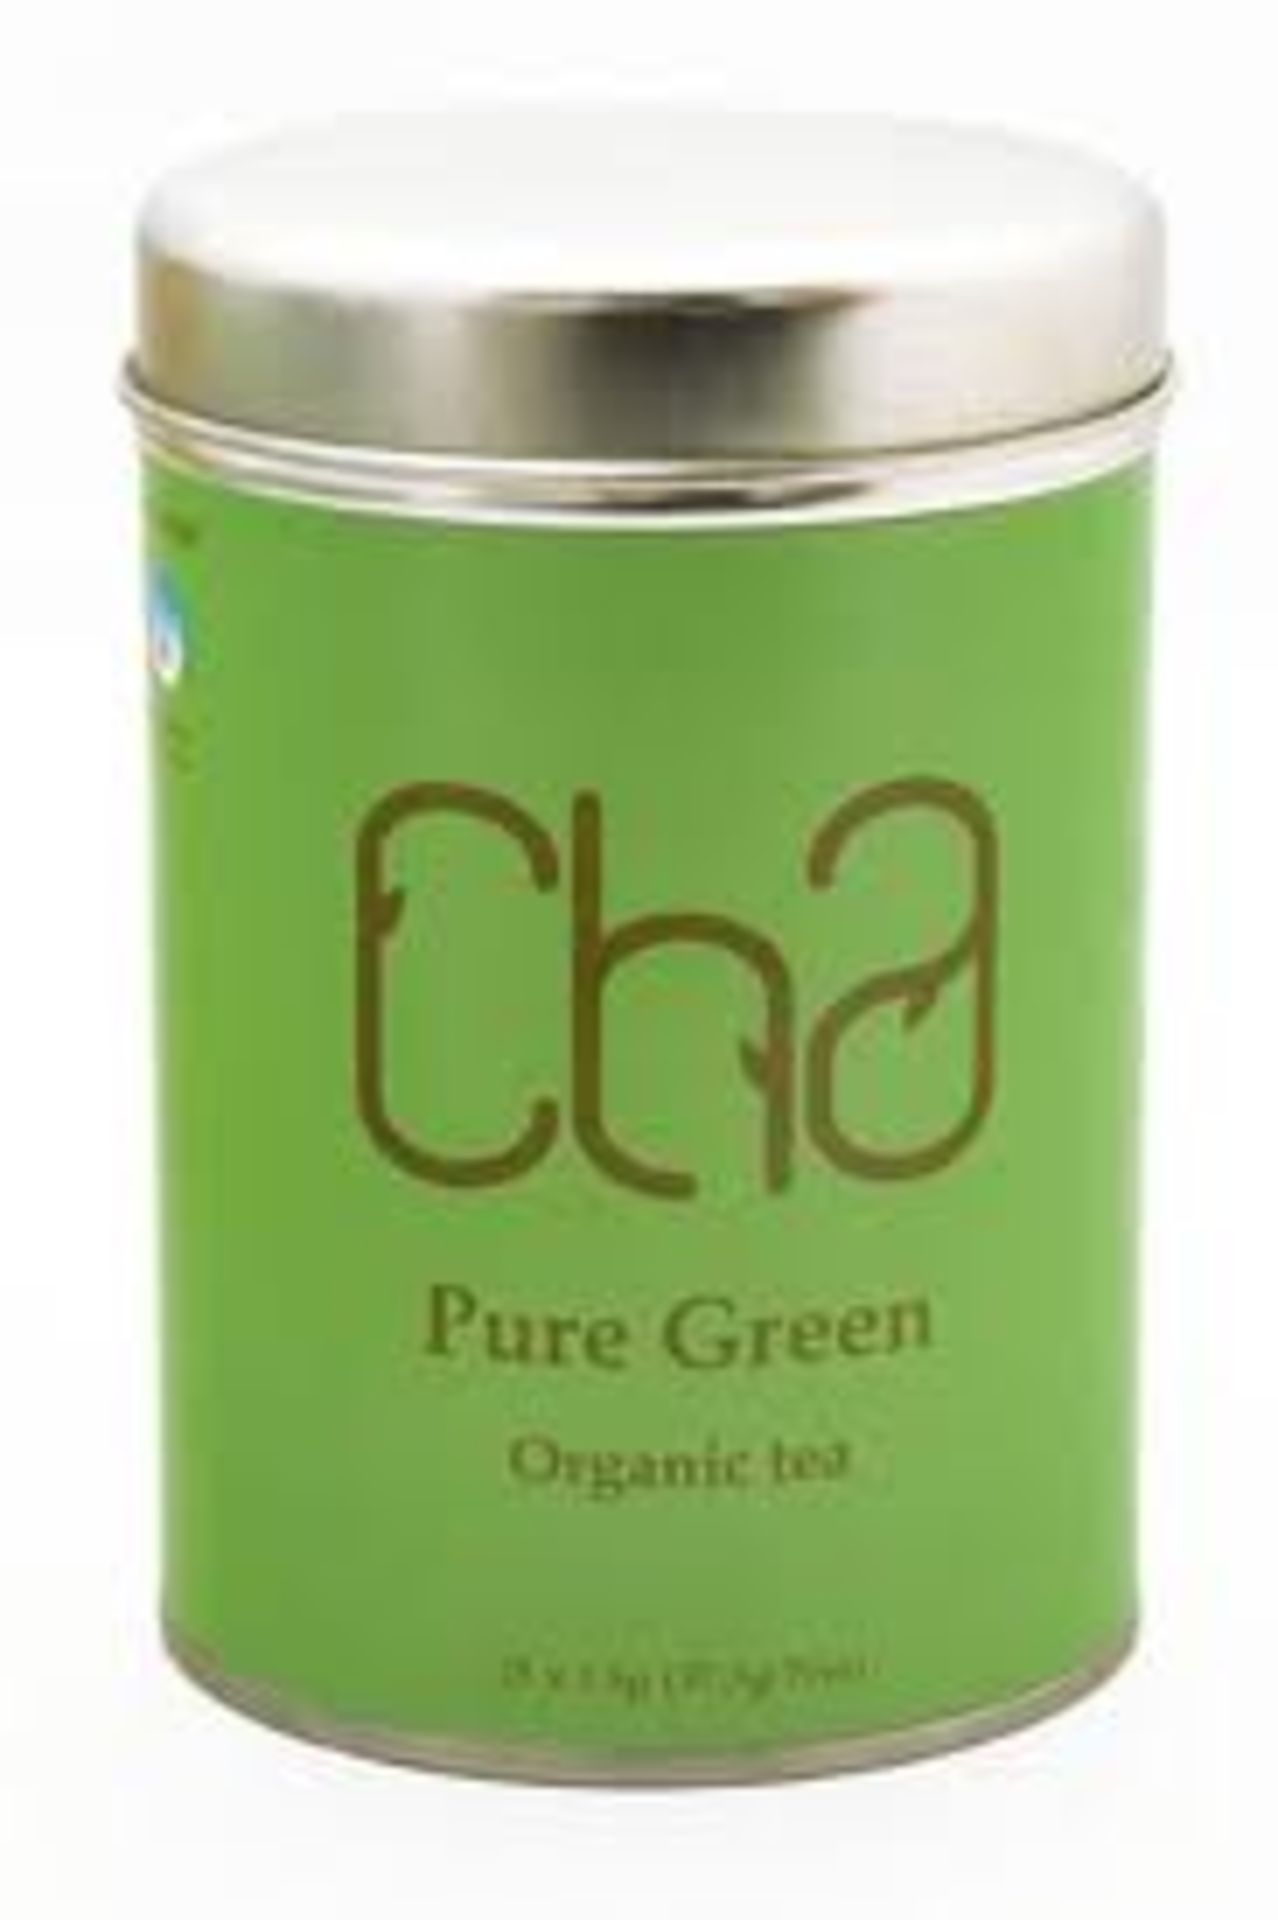 Resale Pallet - 720 x Tins of CHA Organic Tea - PURE BLACK AND PURE GREEN - 100% Natural and Organic - Image 2 of 4